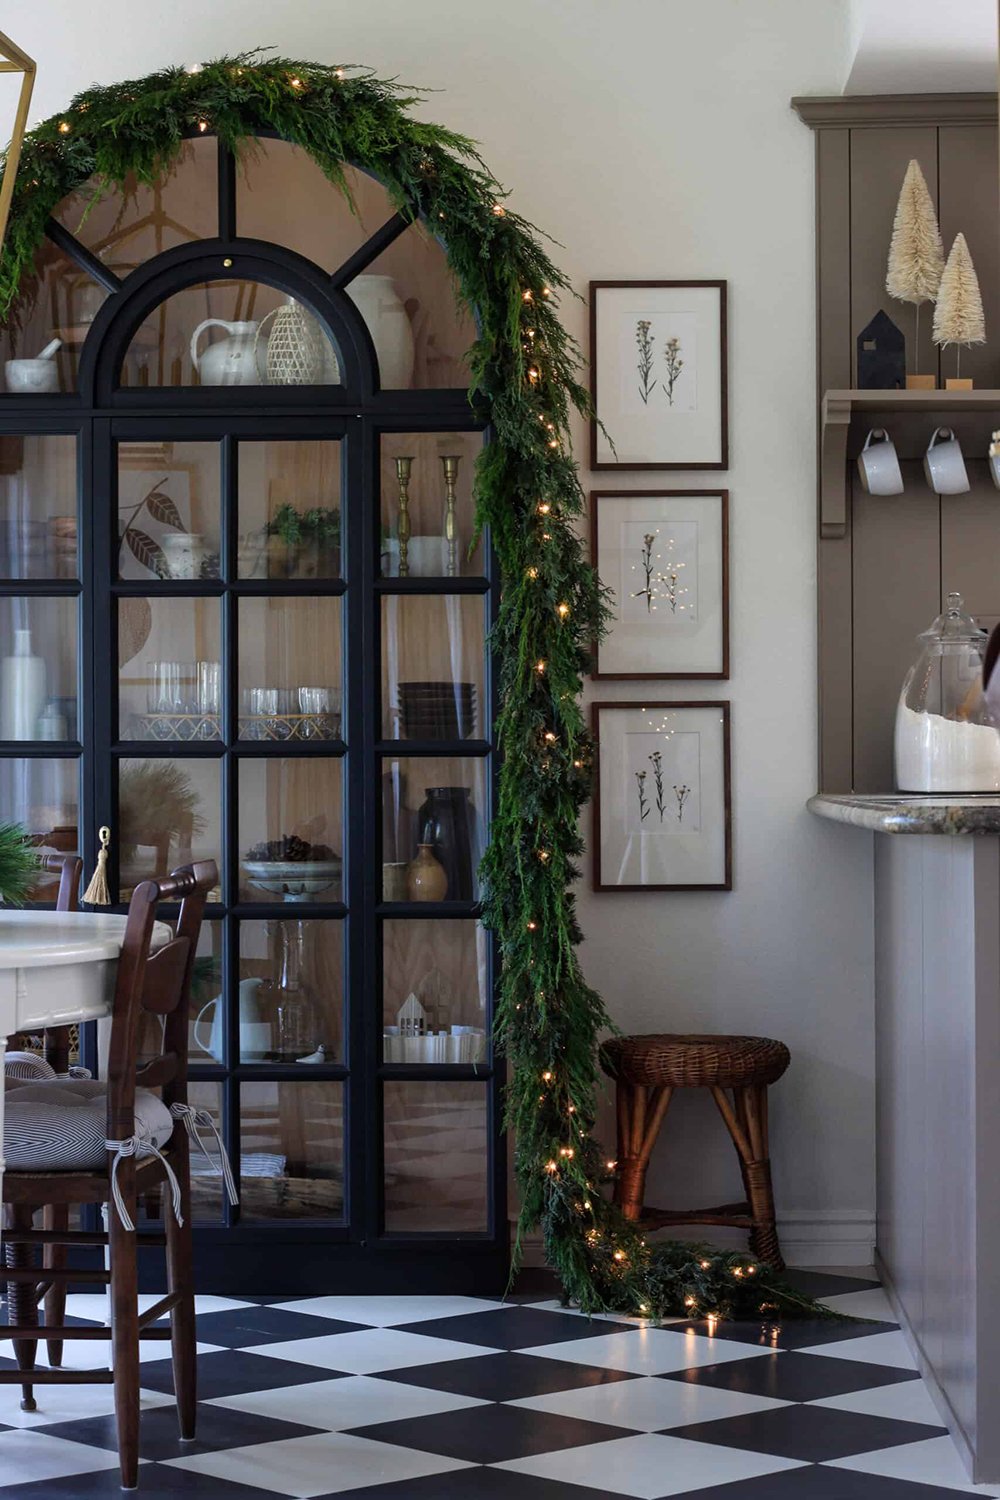 10 Ideas for Styling Garland - roomfortuesday.com